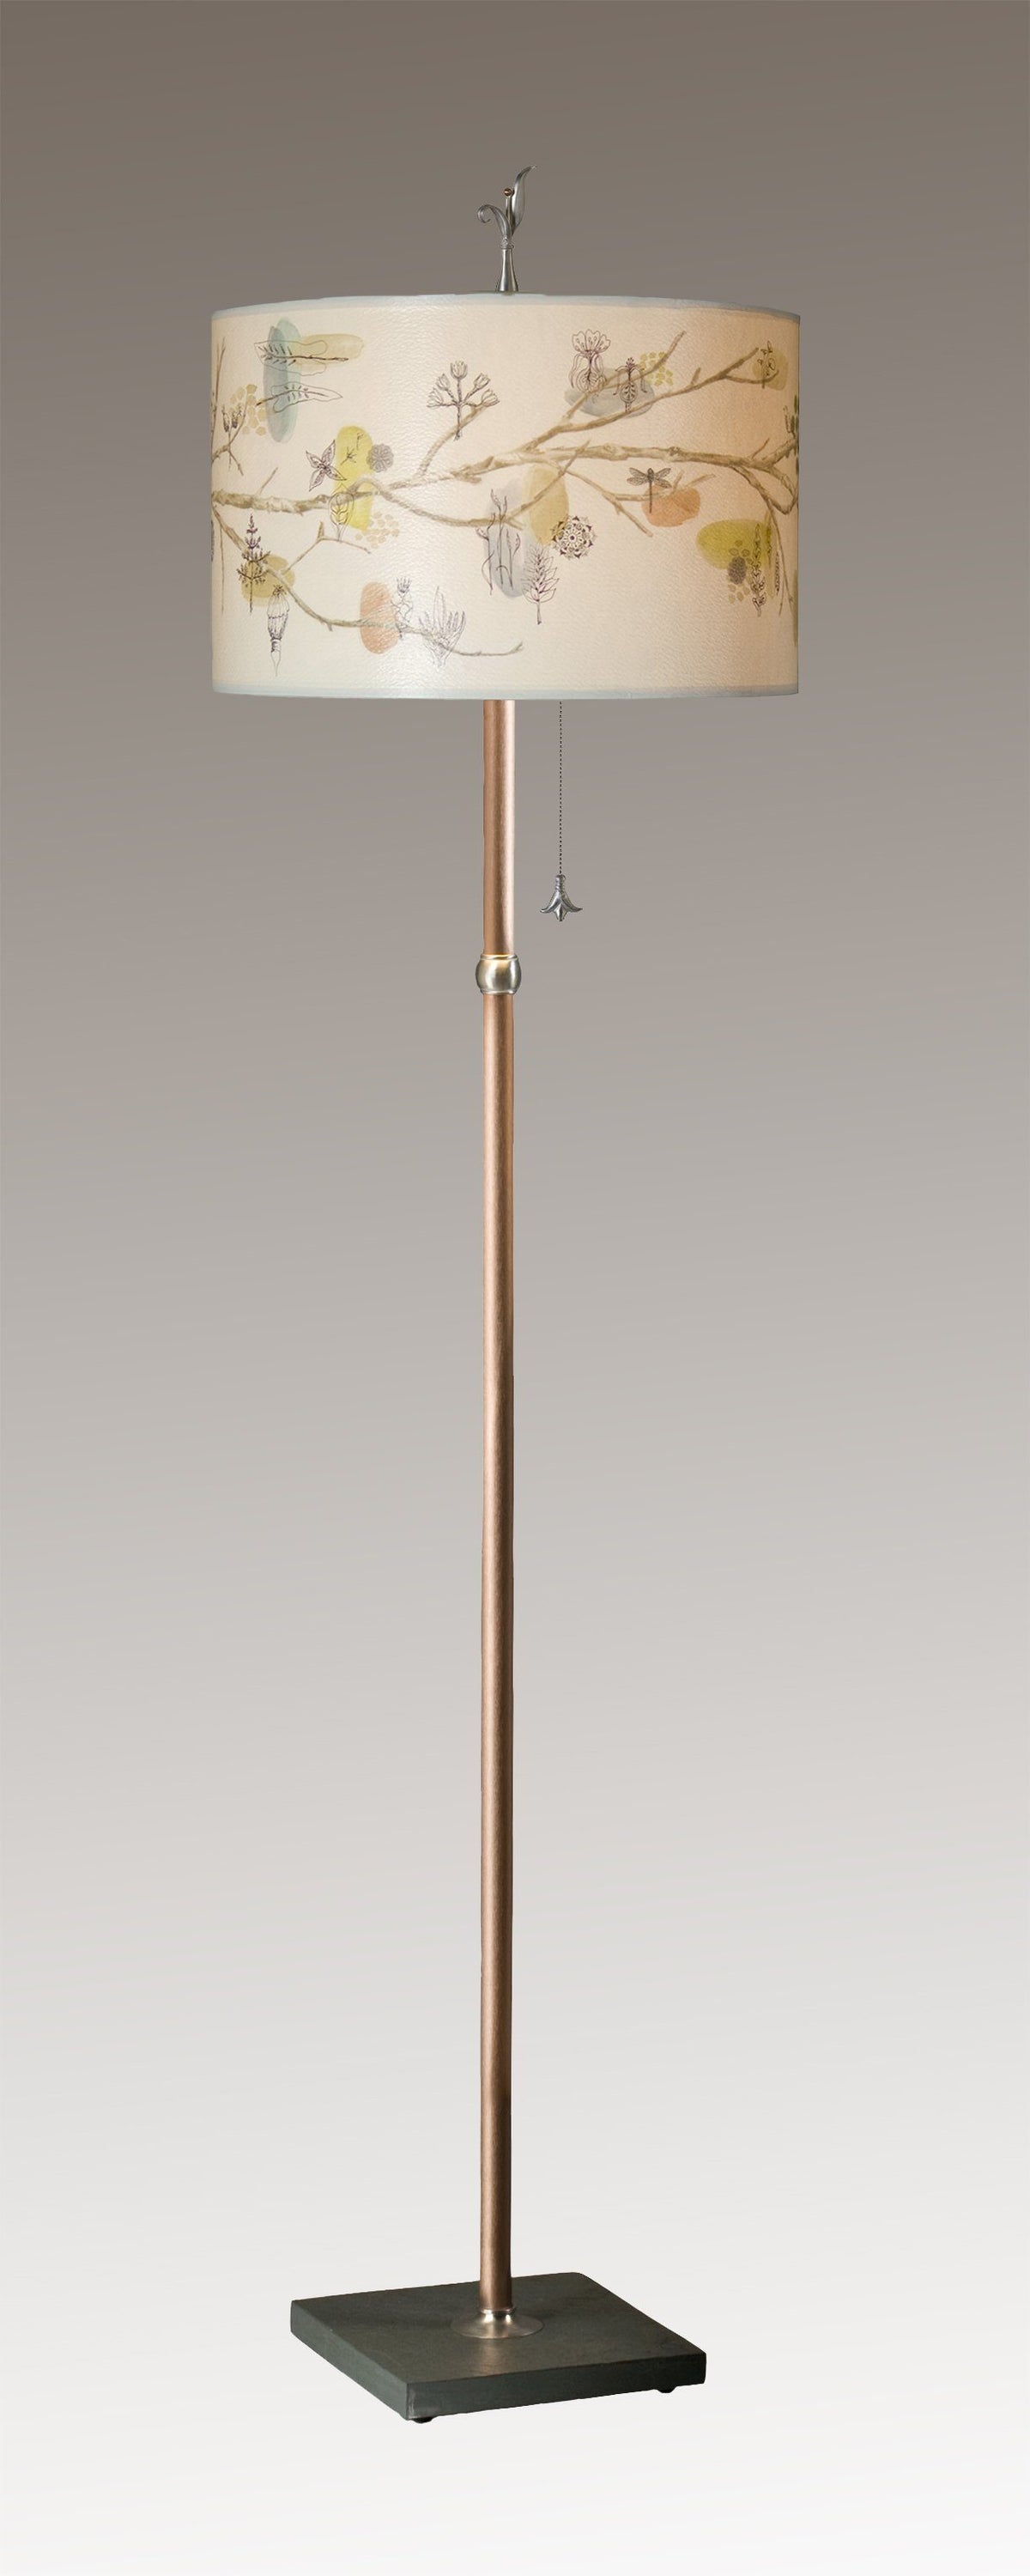 Janna Ugone &amp; Co Floor Lamps Copper Floor Lamp with Large Drum Shade in Artful Branch